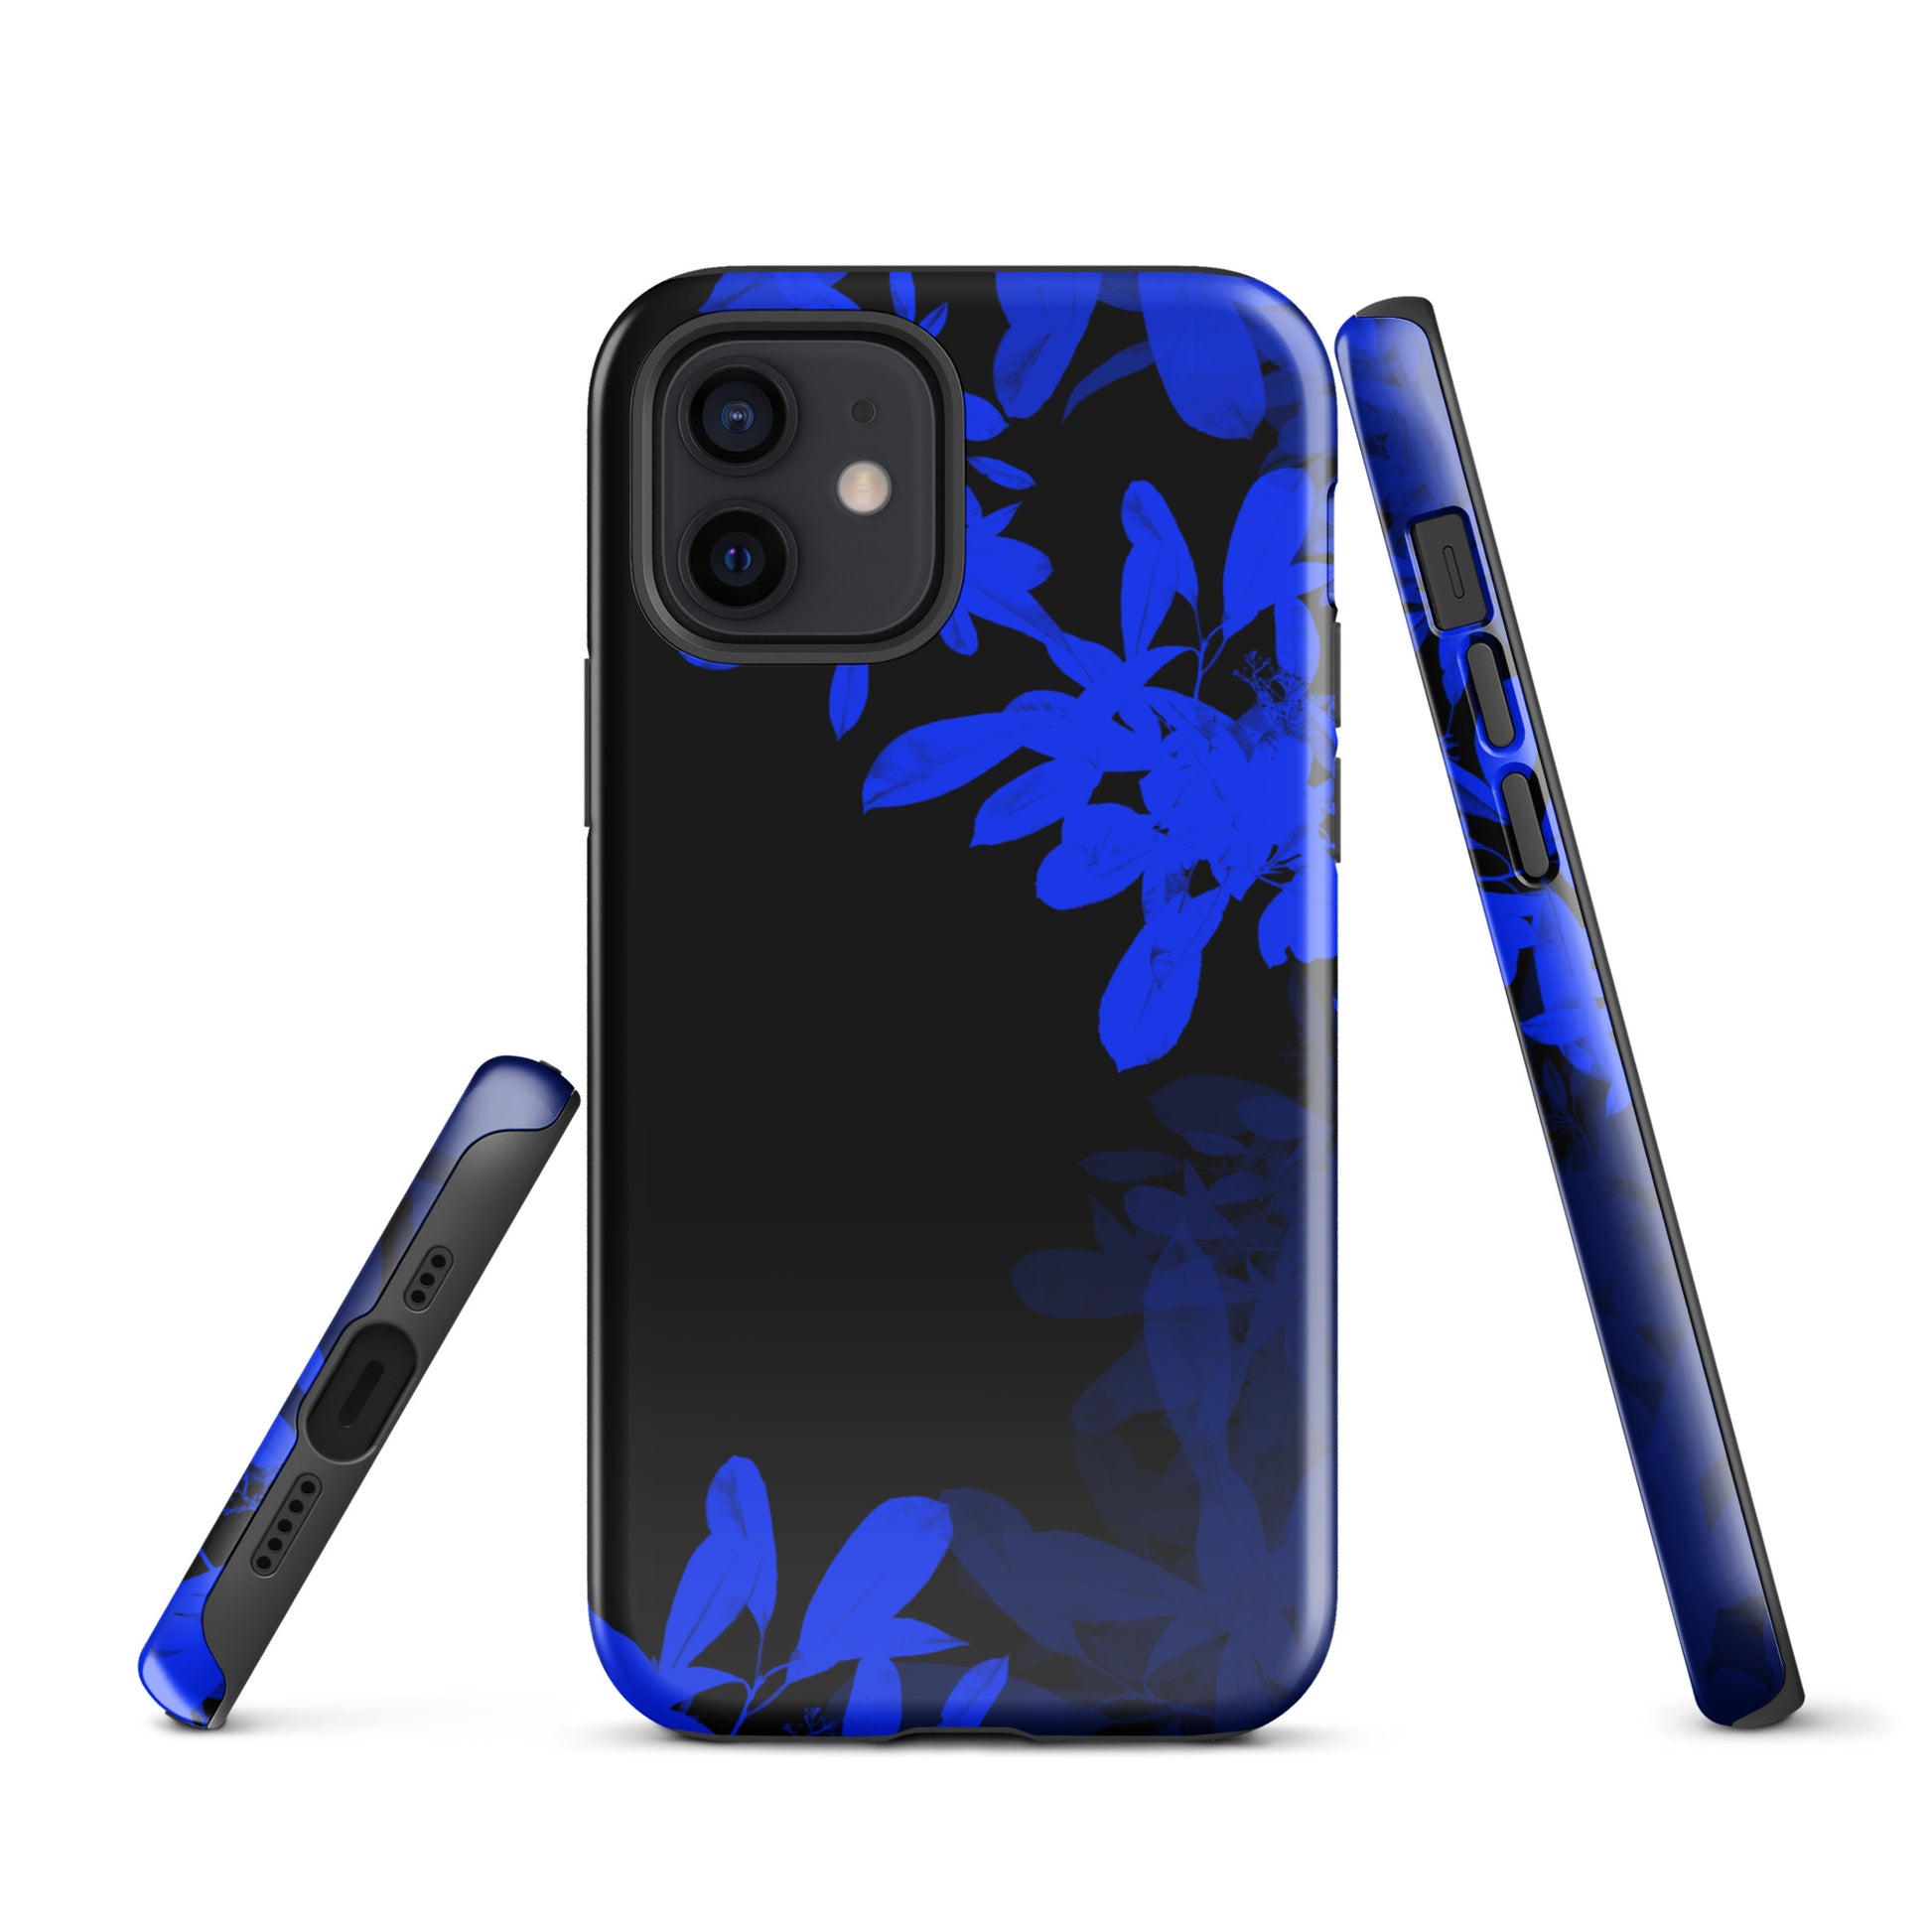 A Night Blue Plant Case for the iPhone 12 